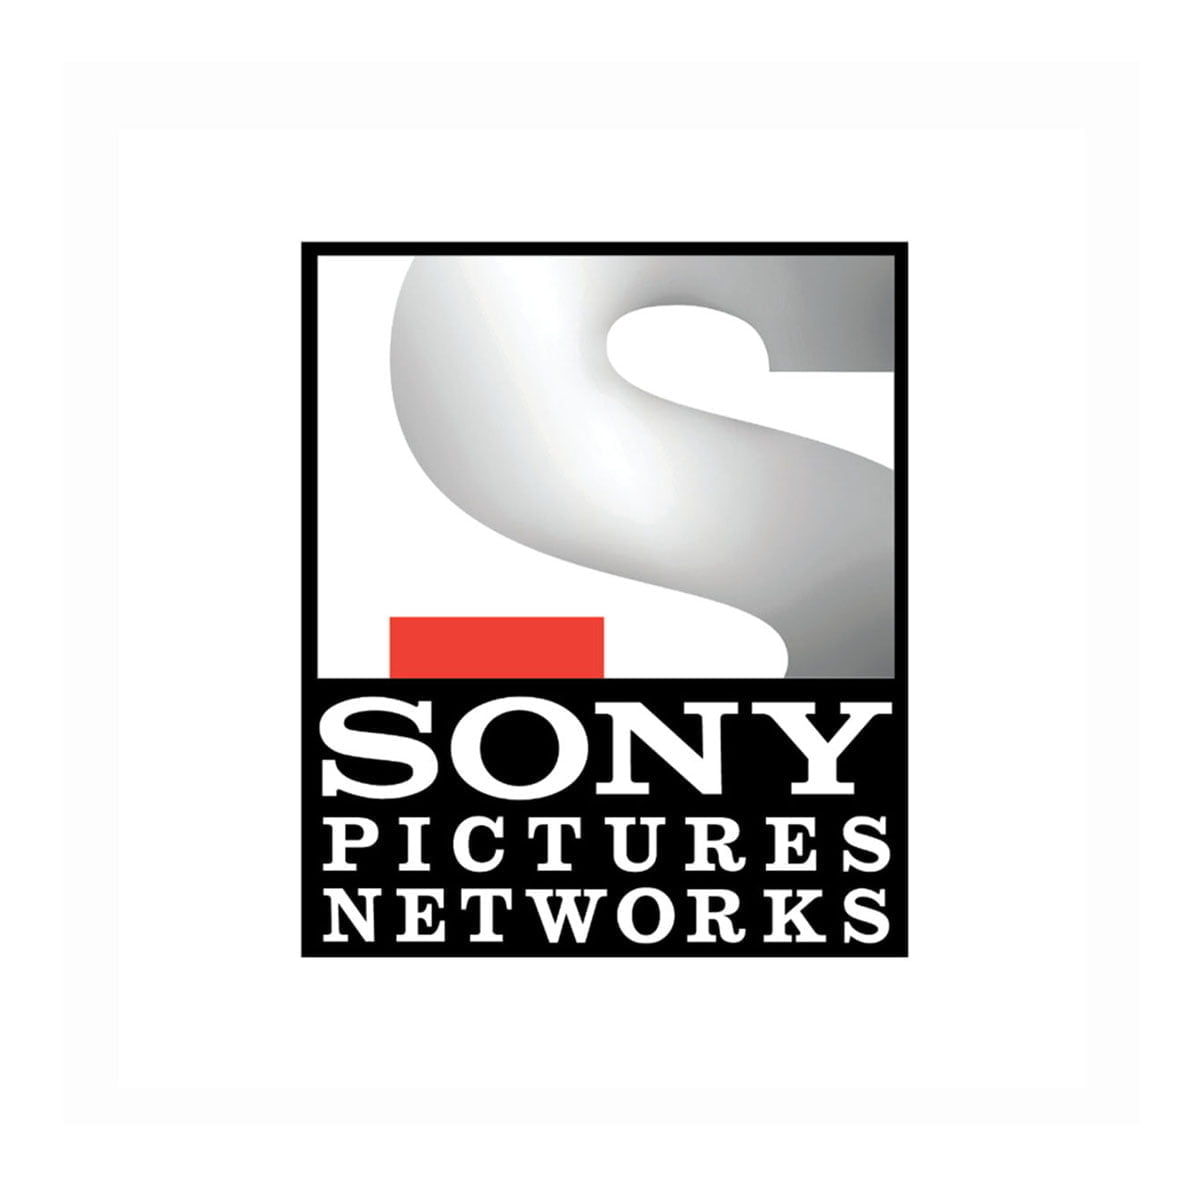 Sony Pictures Network revises pricing; hikes bouquet rates and introduces new bouquets